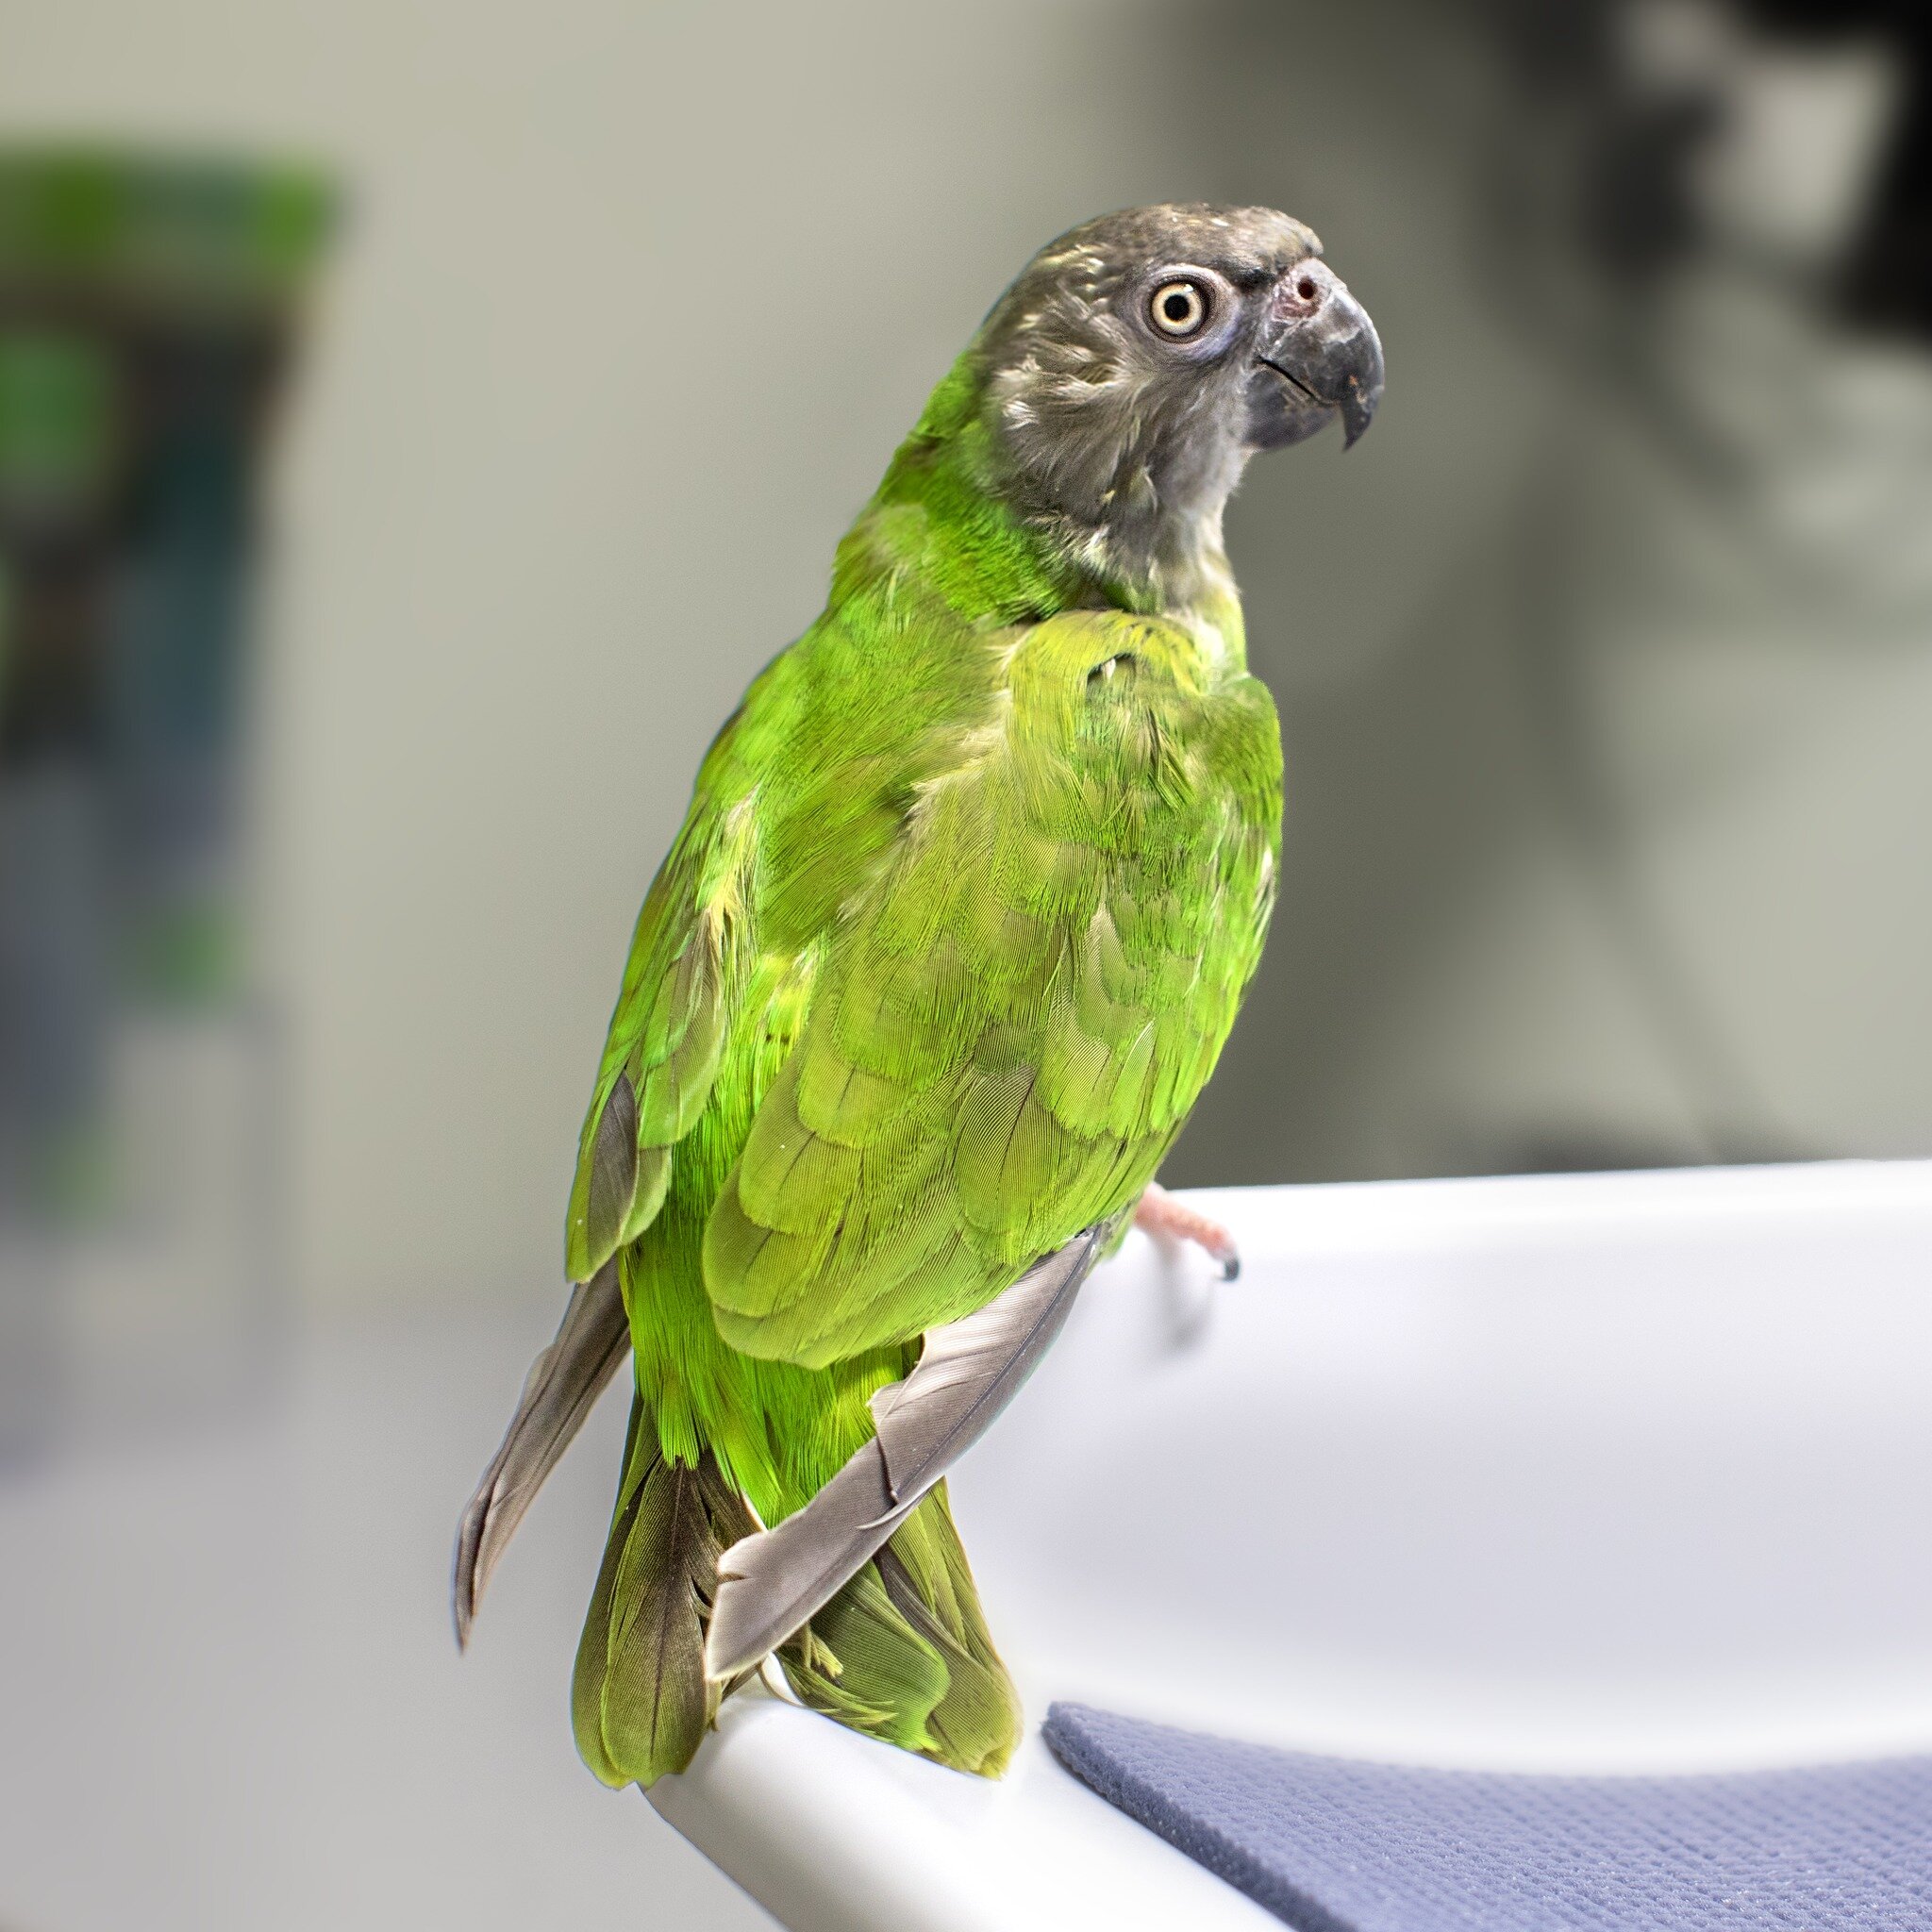 Meet Jerry, the handsome Senegal parrot who came in for a yearly exam! Although his exam was mostly normal, a few concerns suggested x-rays were the next best step. Based on the x-ray findings and blood work, it was determined that Jerry may be eatin